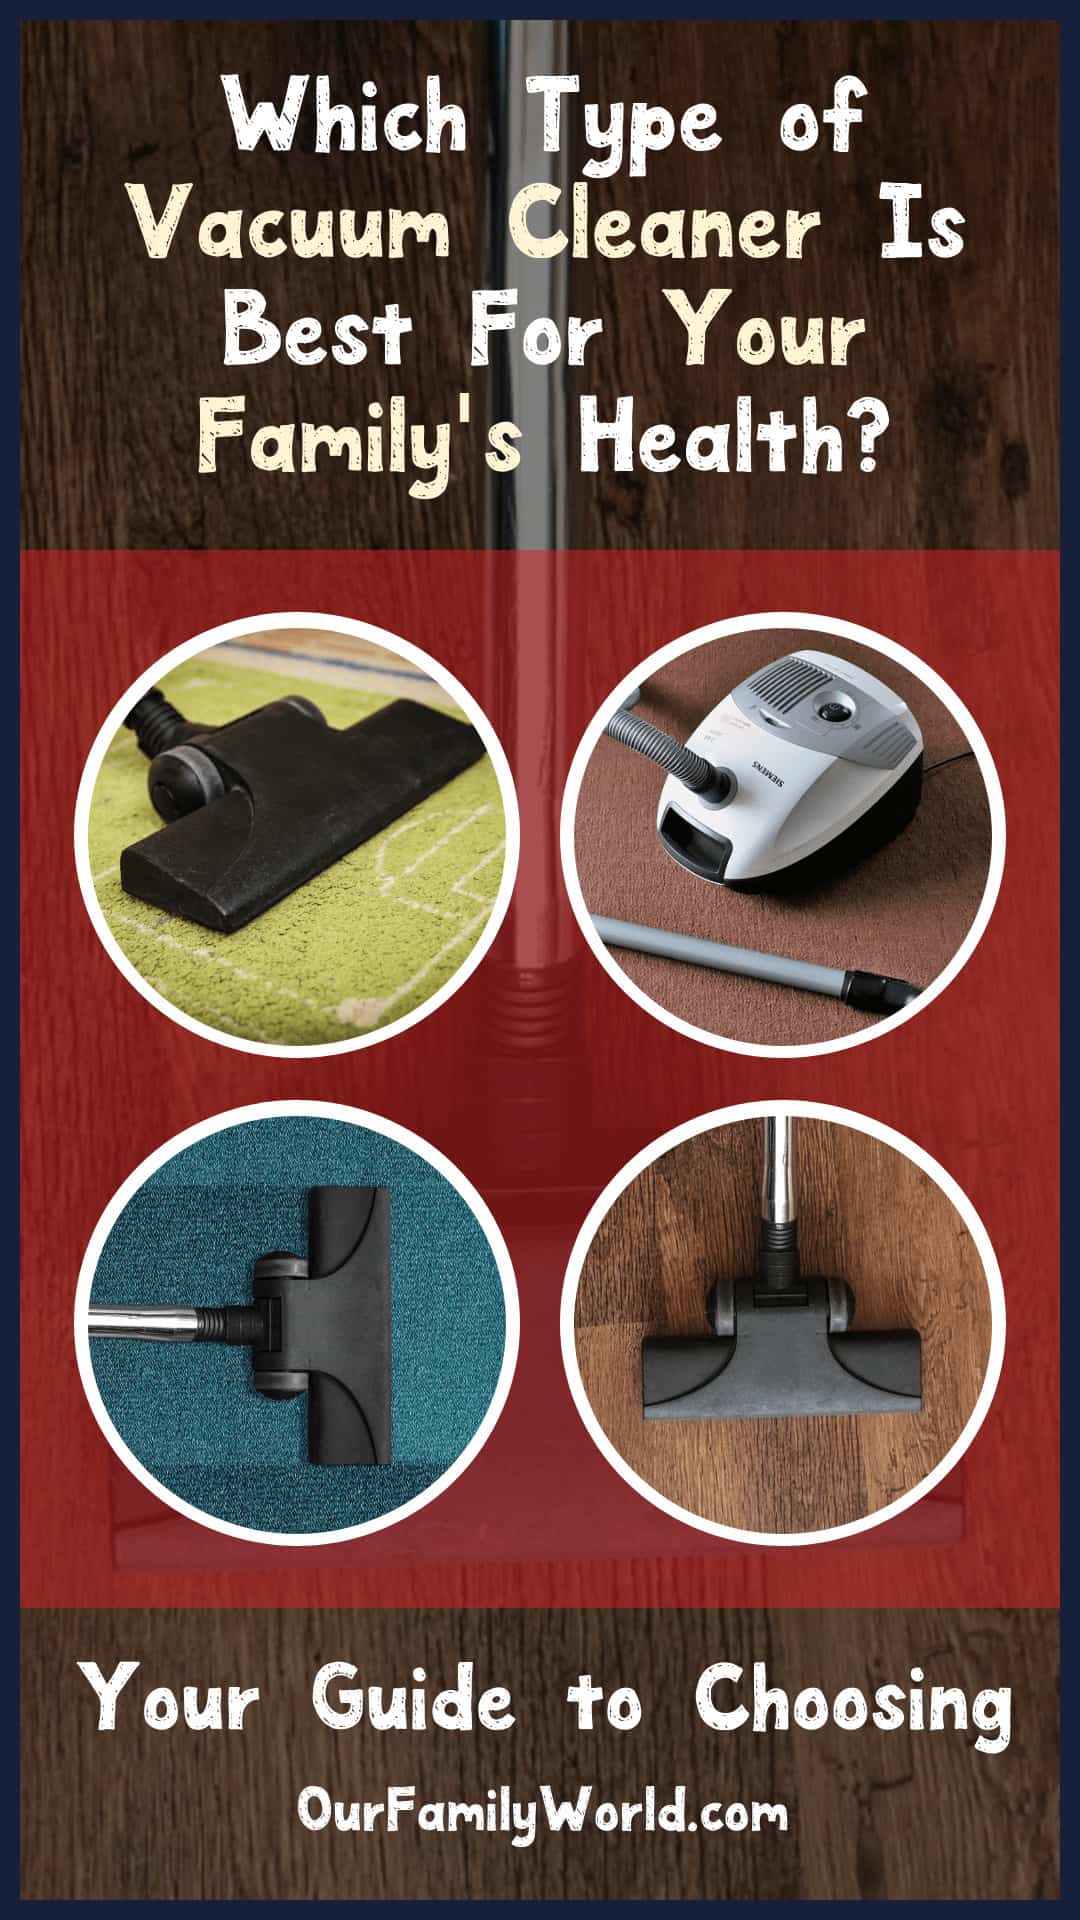 Knowing which type of vacuum cleaner is best for your family's health can be challenging! We’re sharing tips to help you decide on the perfect vacuum for your needs! Check it out!